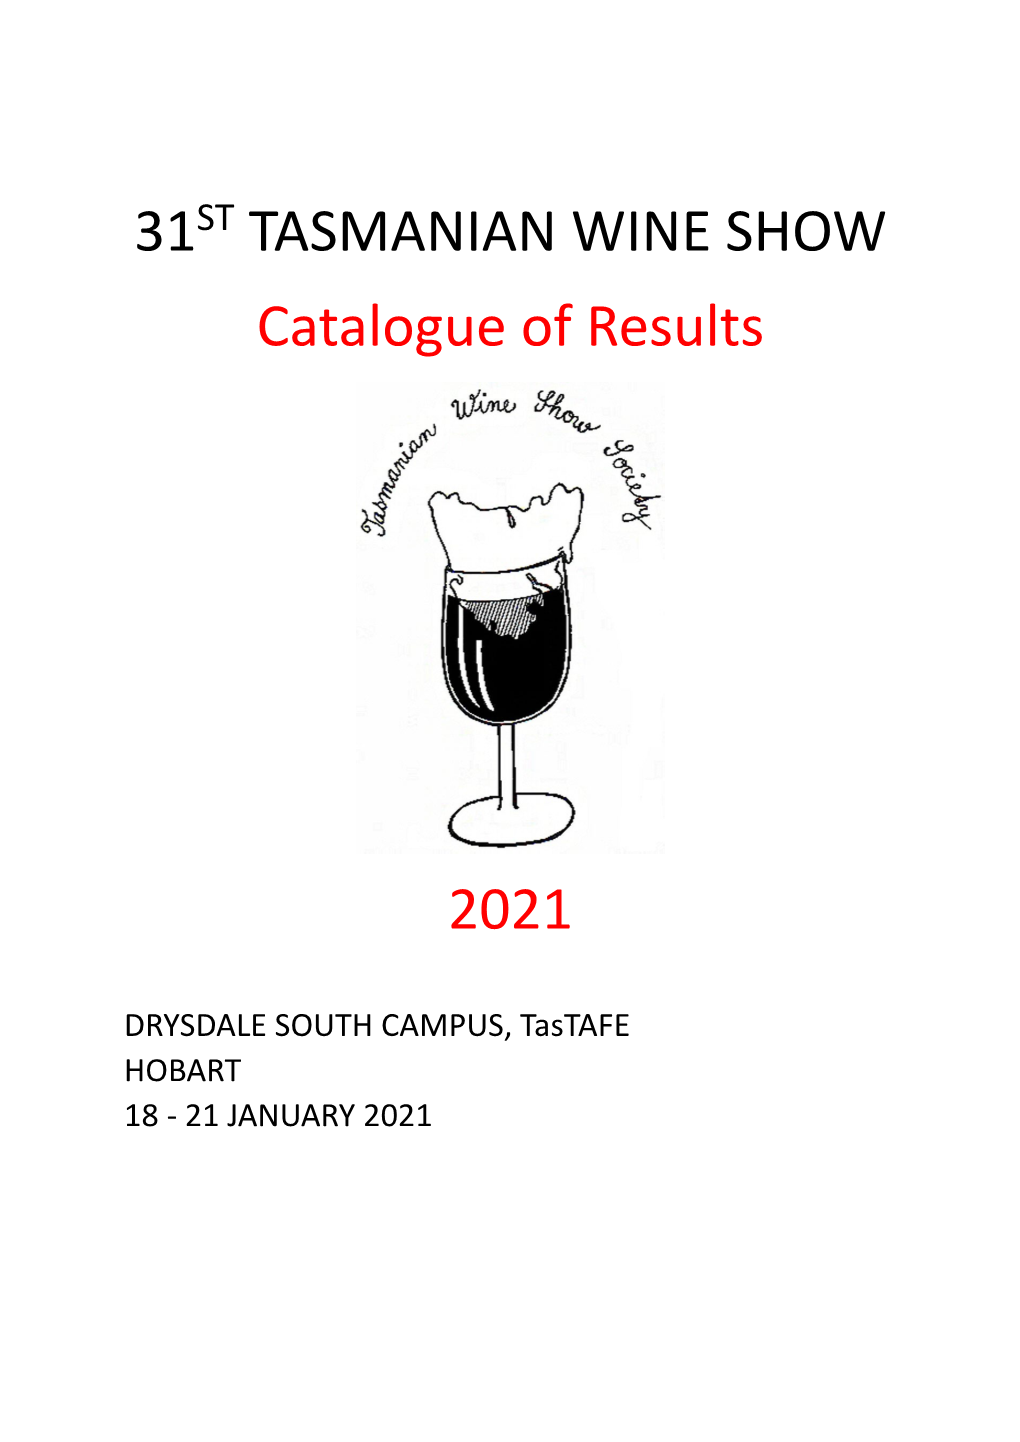 31ST TASMANIAN WINE SHOW Catalogue of Results 2021